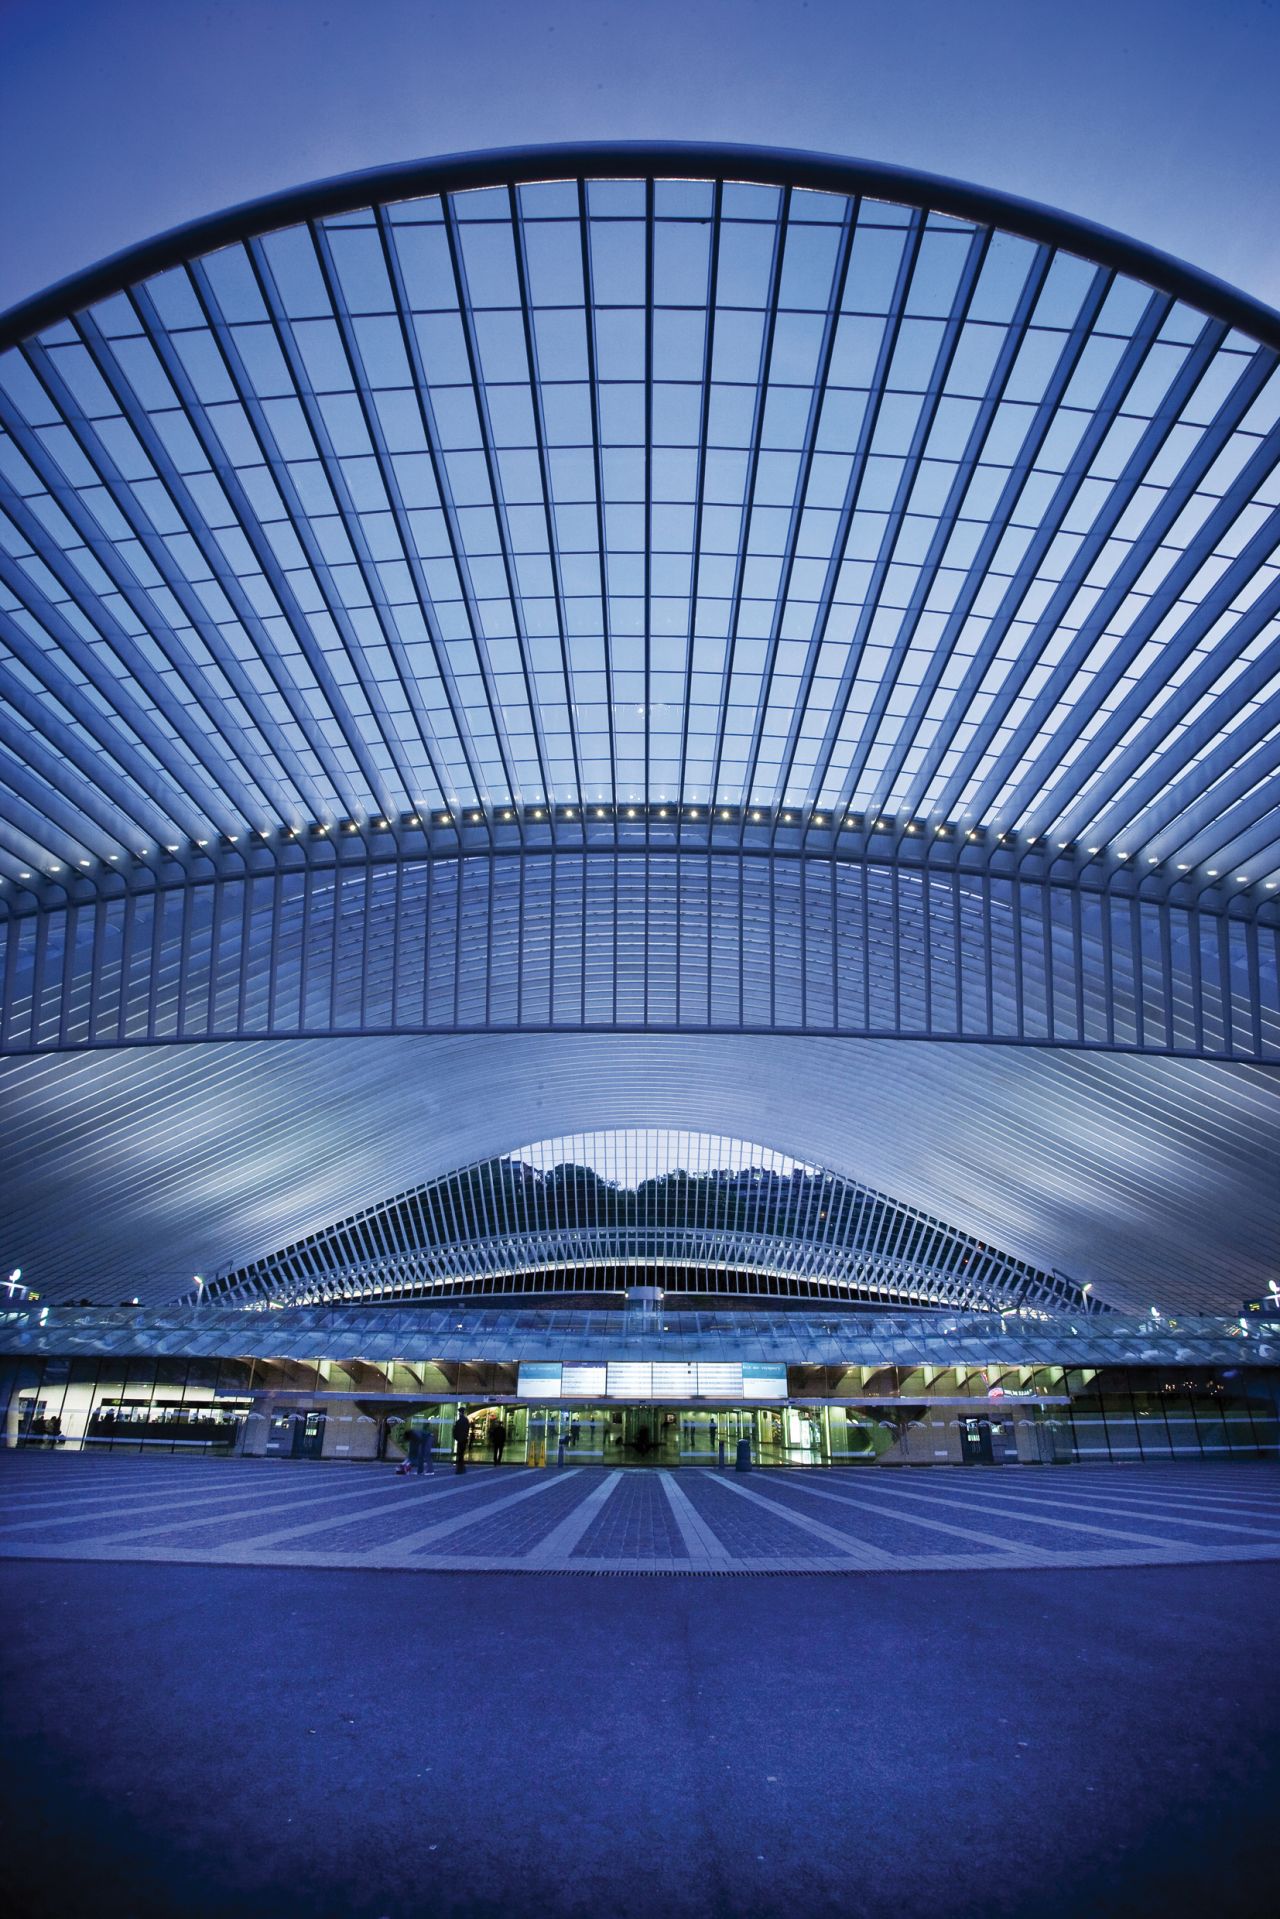 During the Liège-Guillemins Station's 10-year construction period, the trains to and from Liège were never shut down. 